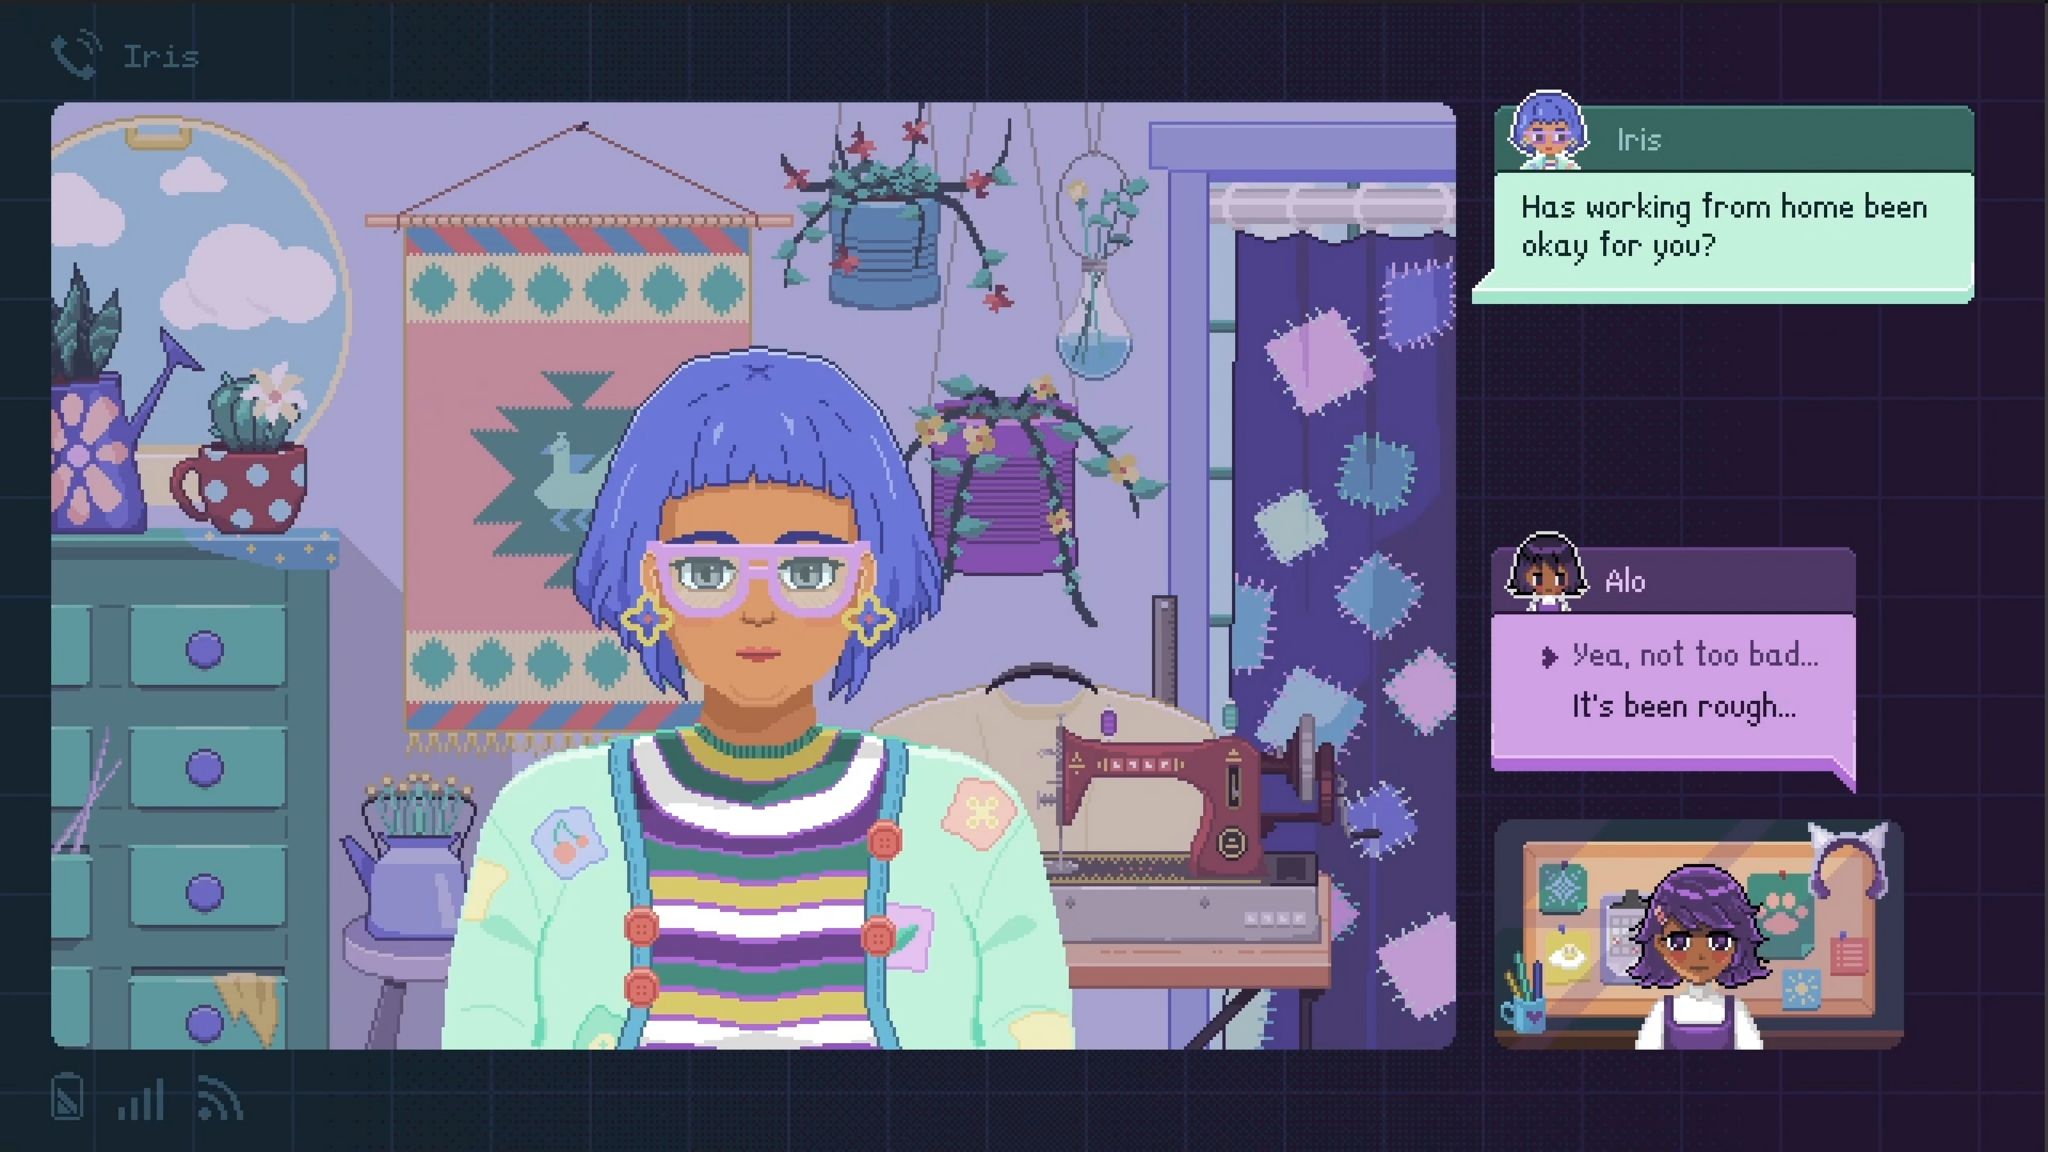 Two pixellated characters conduct a video call in this screenshot from video game Fishbowl. One is displayed in a larger window, with the room behind her filled with hanging plants, tapestries and a sewing machine, suggesting an arty personality.